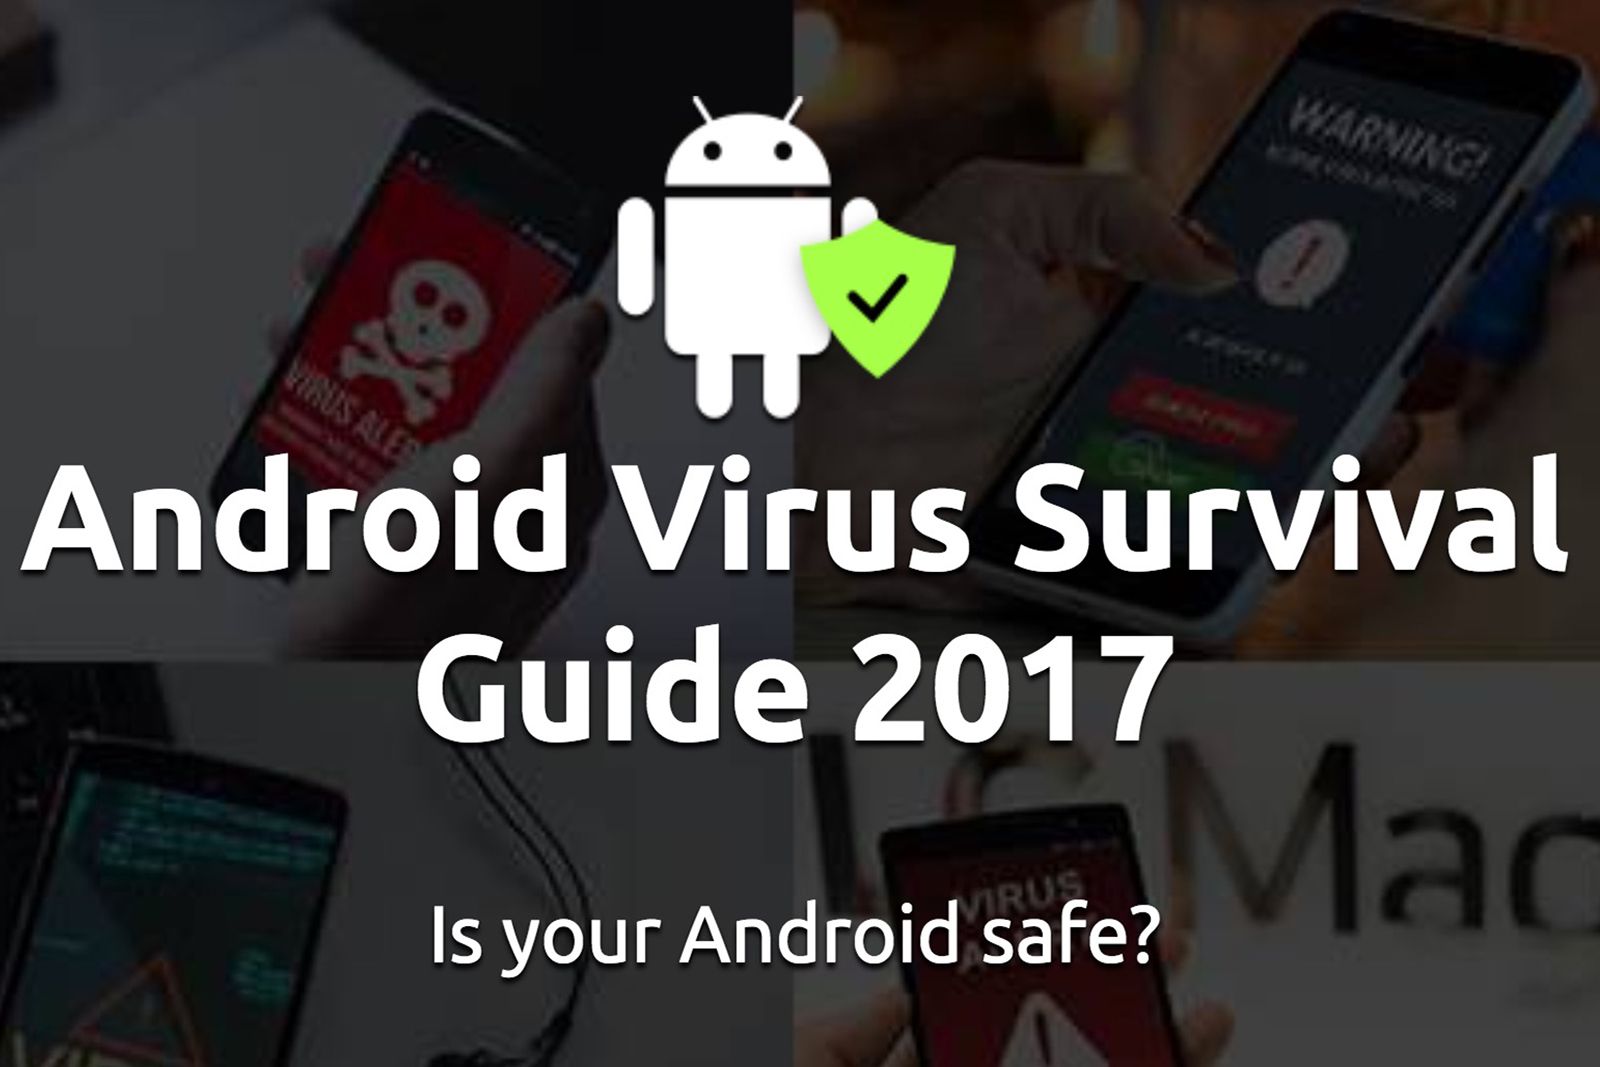 TunesGo launched an Android security test and survival guide against viruses image 1